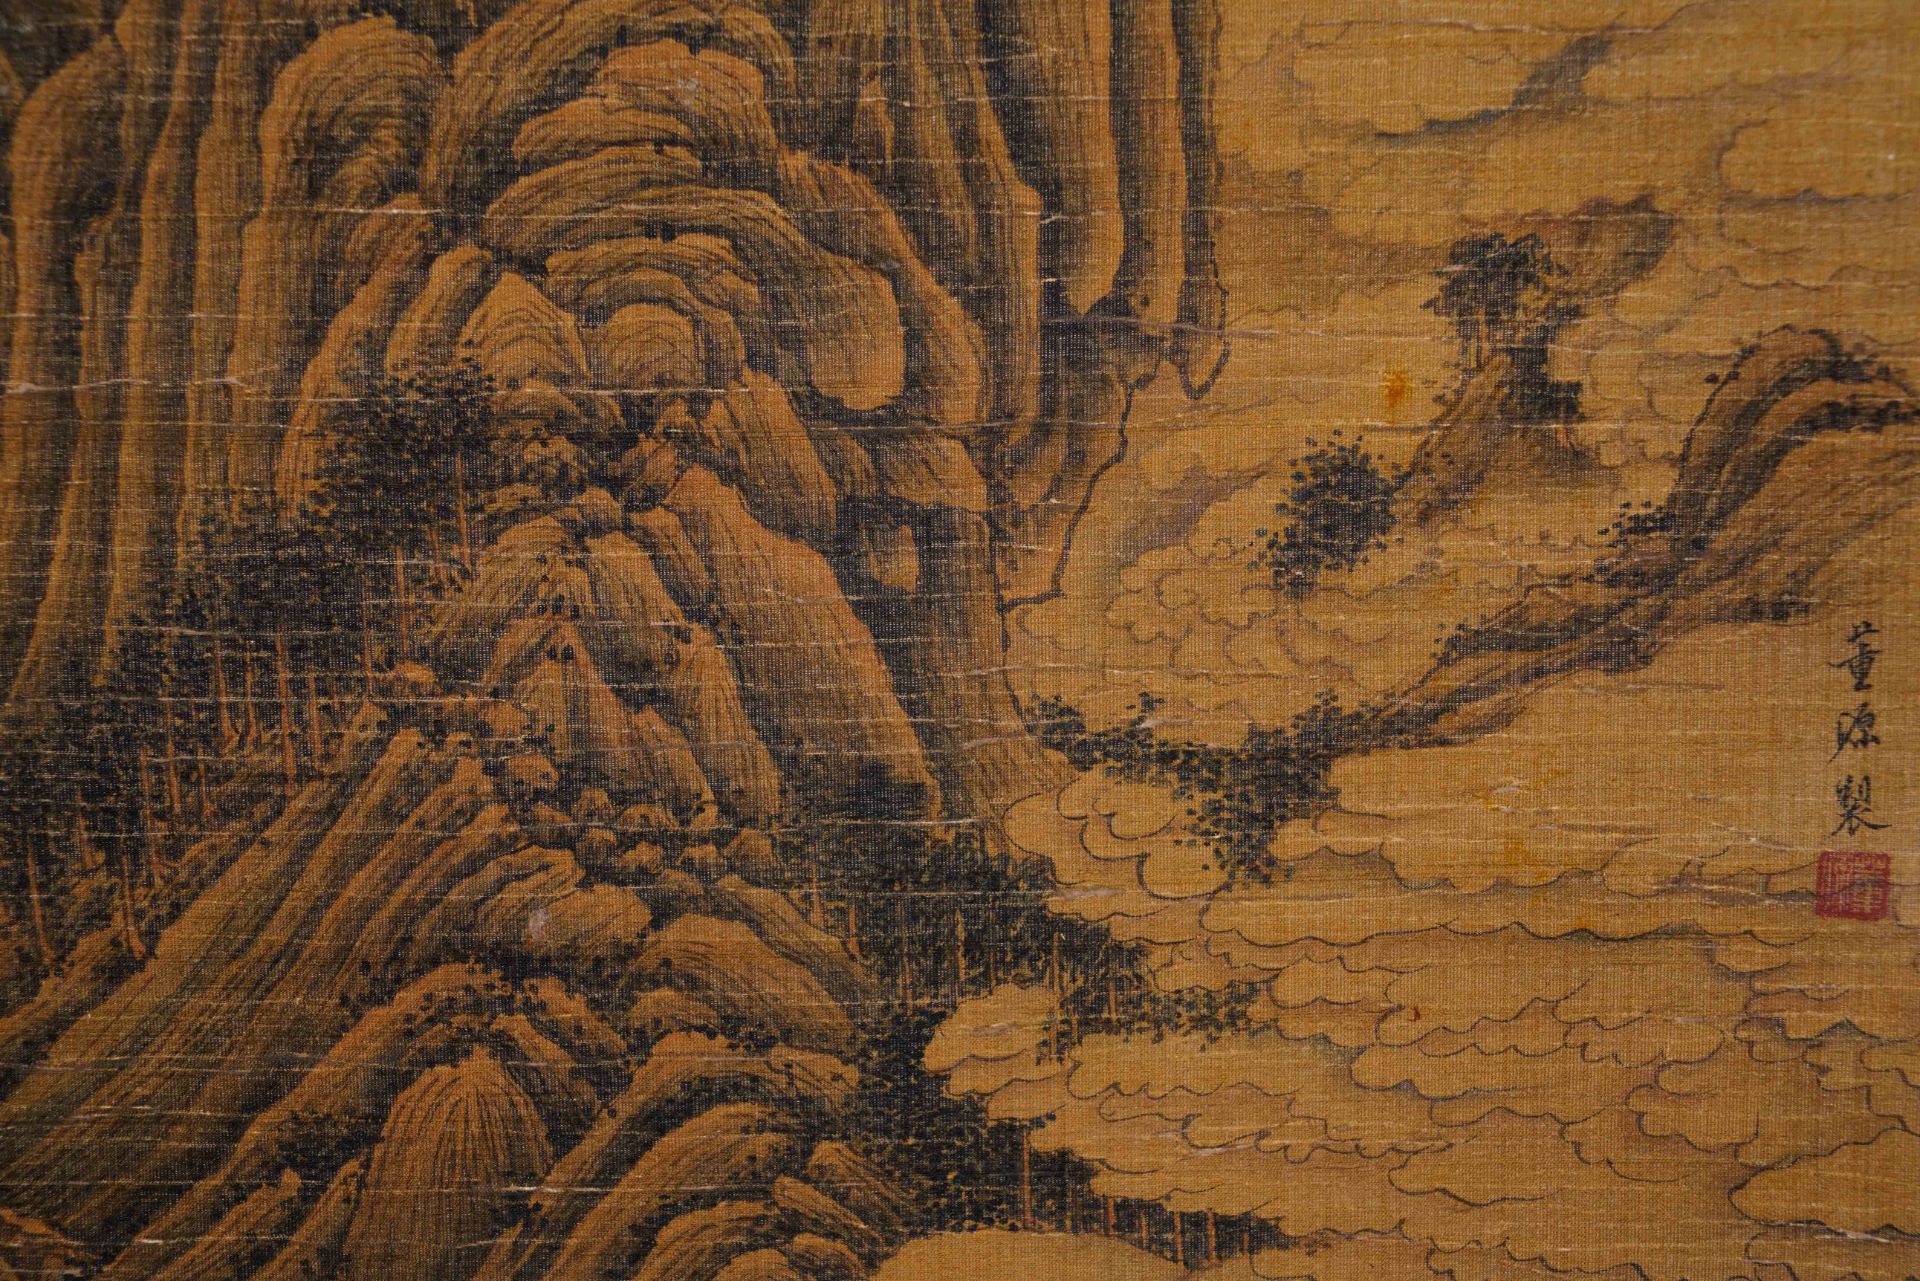 A Chinese Scroll Painting By Dong Yuan - Image 5 of 12